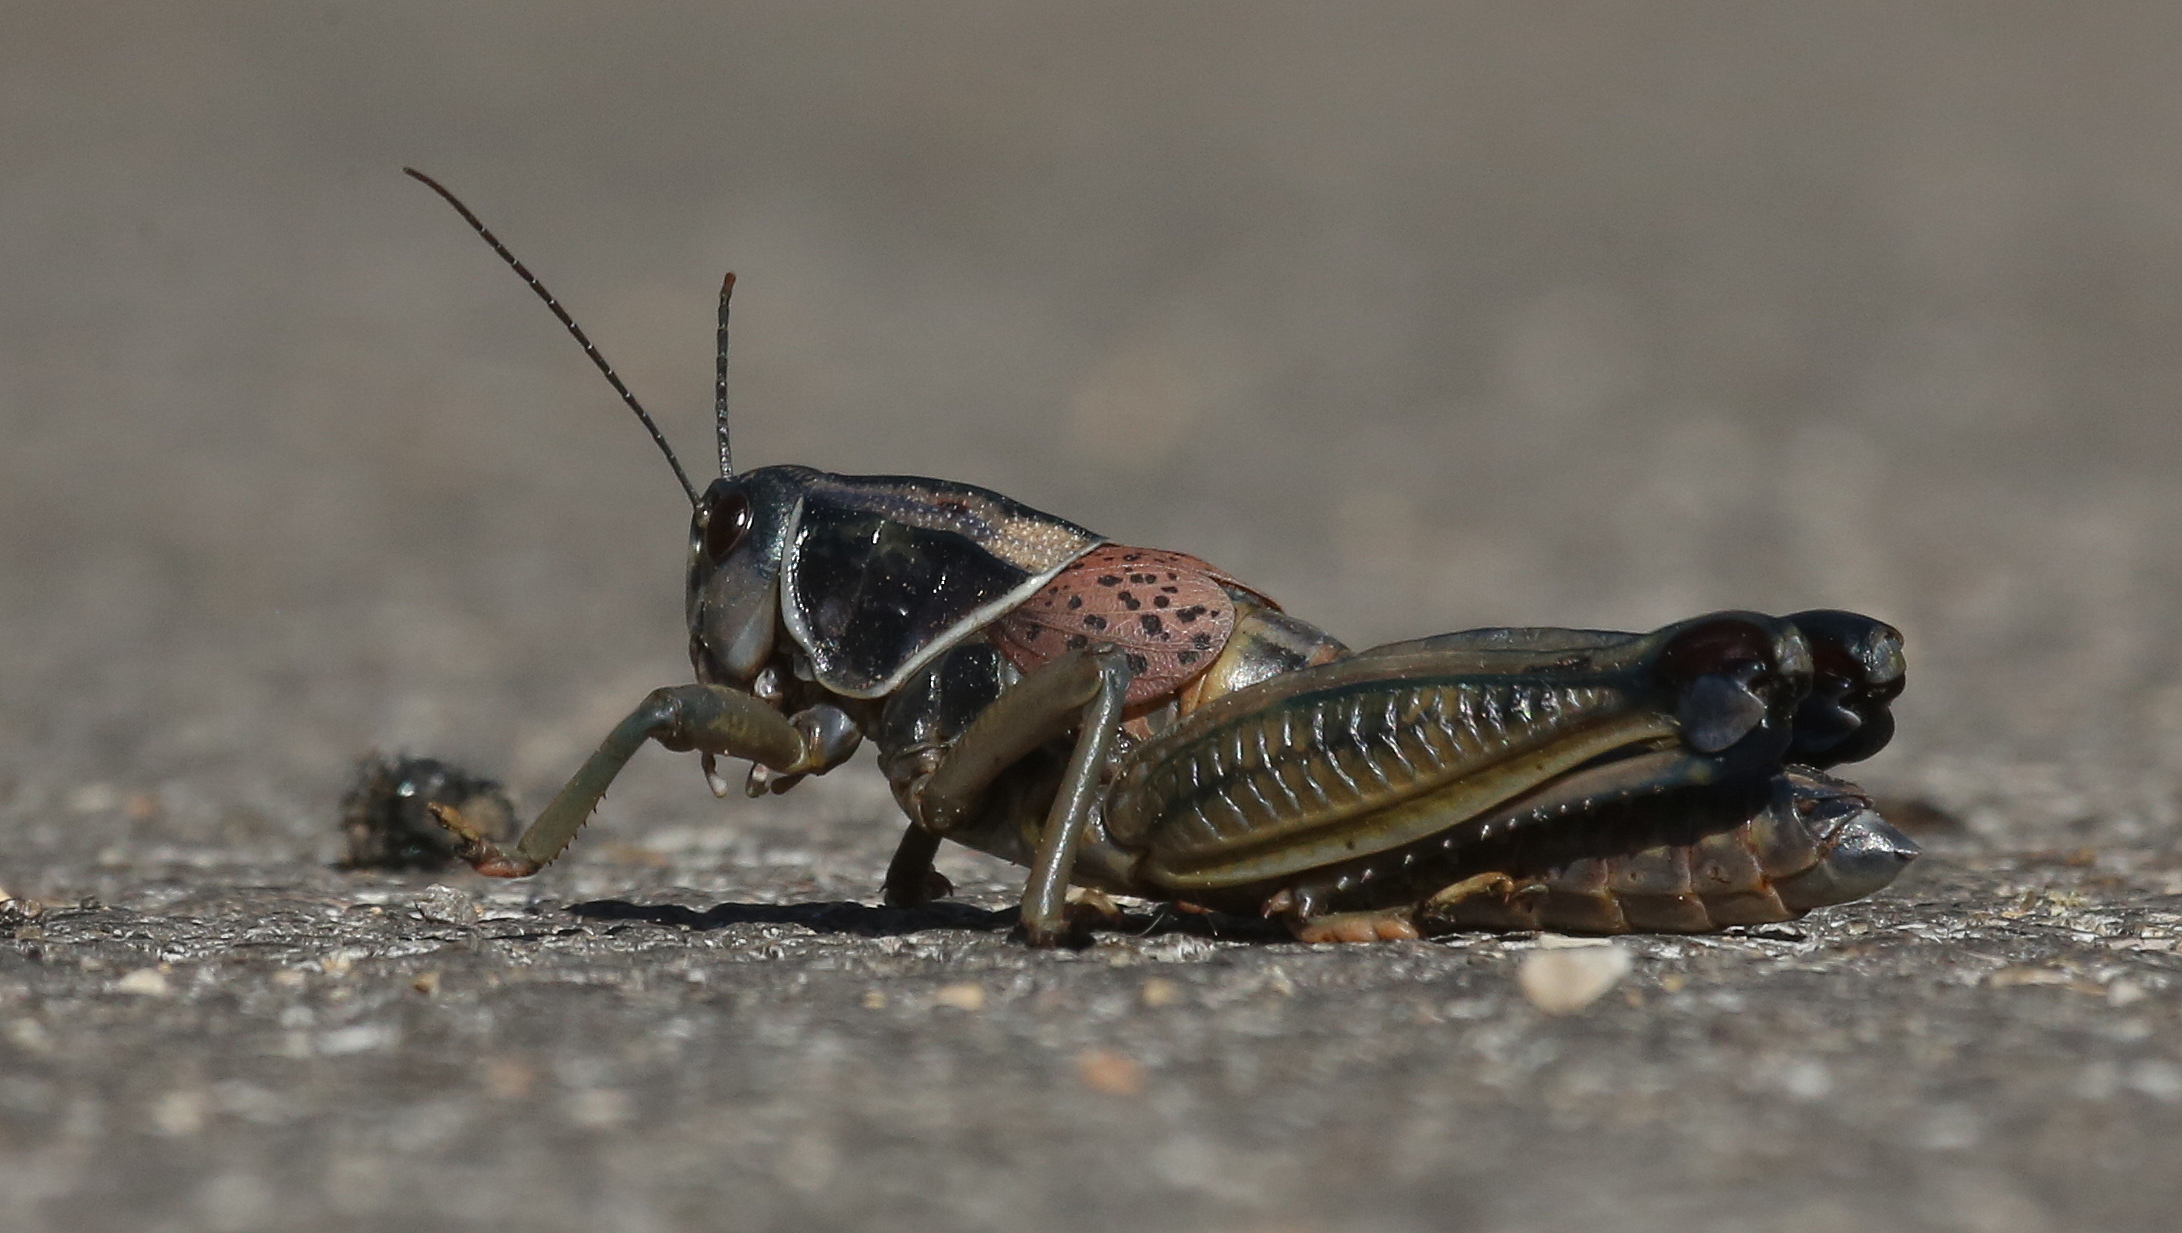 a close up of a grasshopper with an insect on the ground